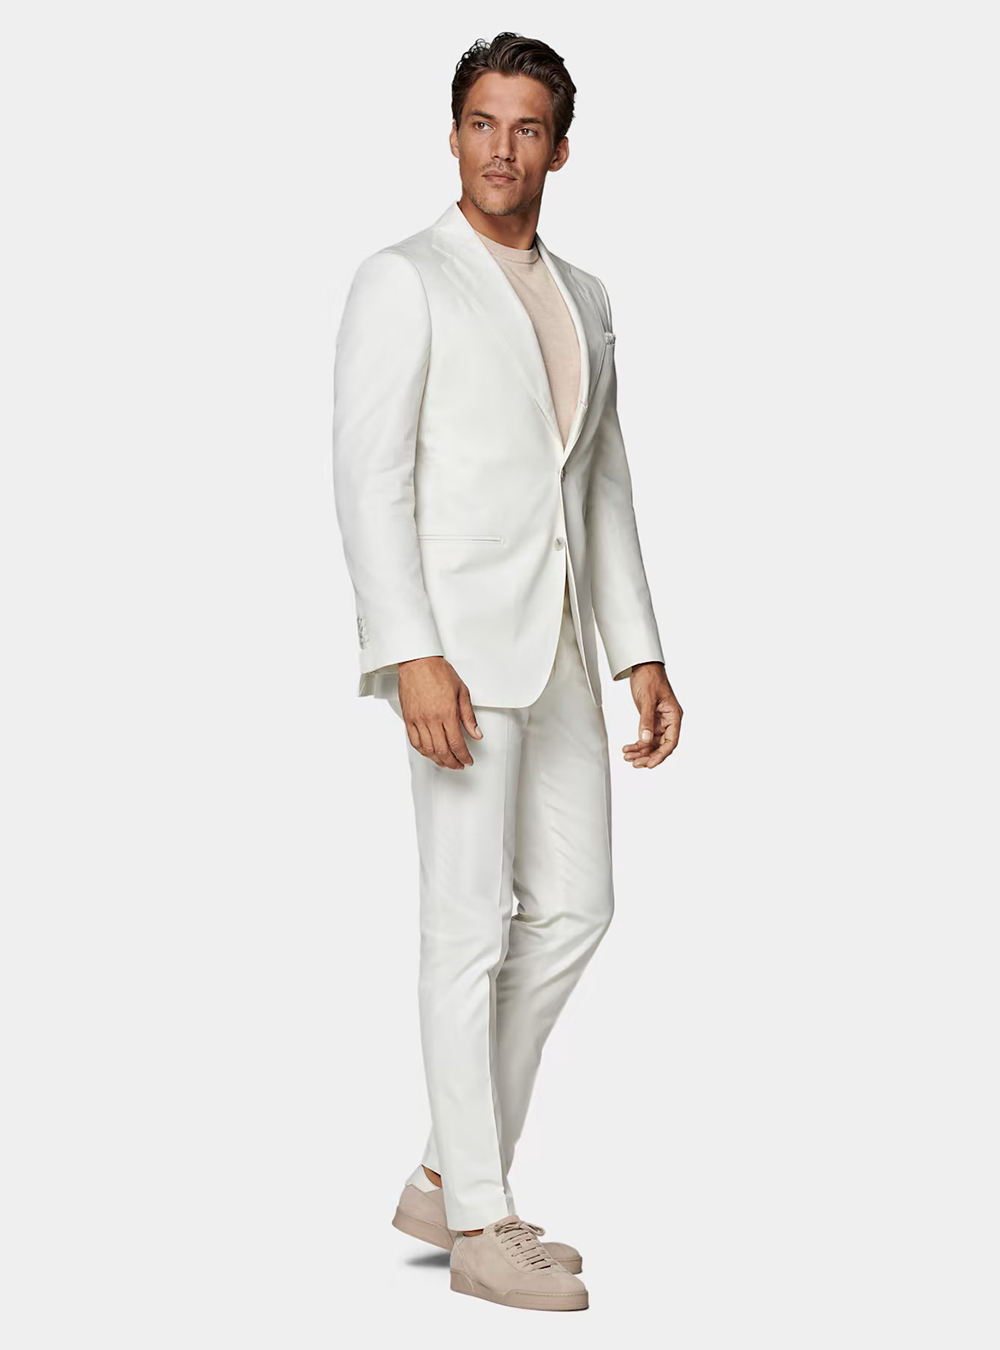 white linen suit, tan t-shirt, and tan sneakers